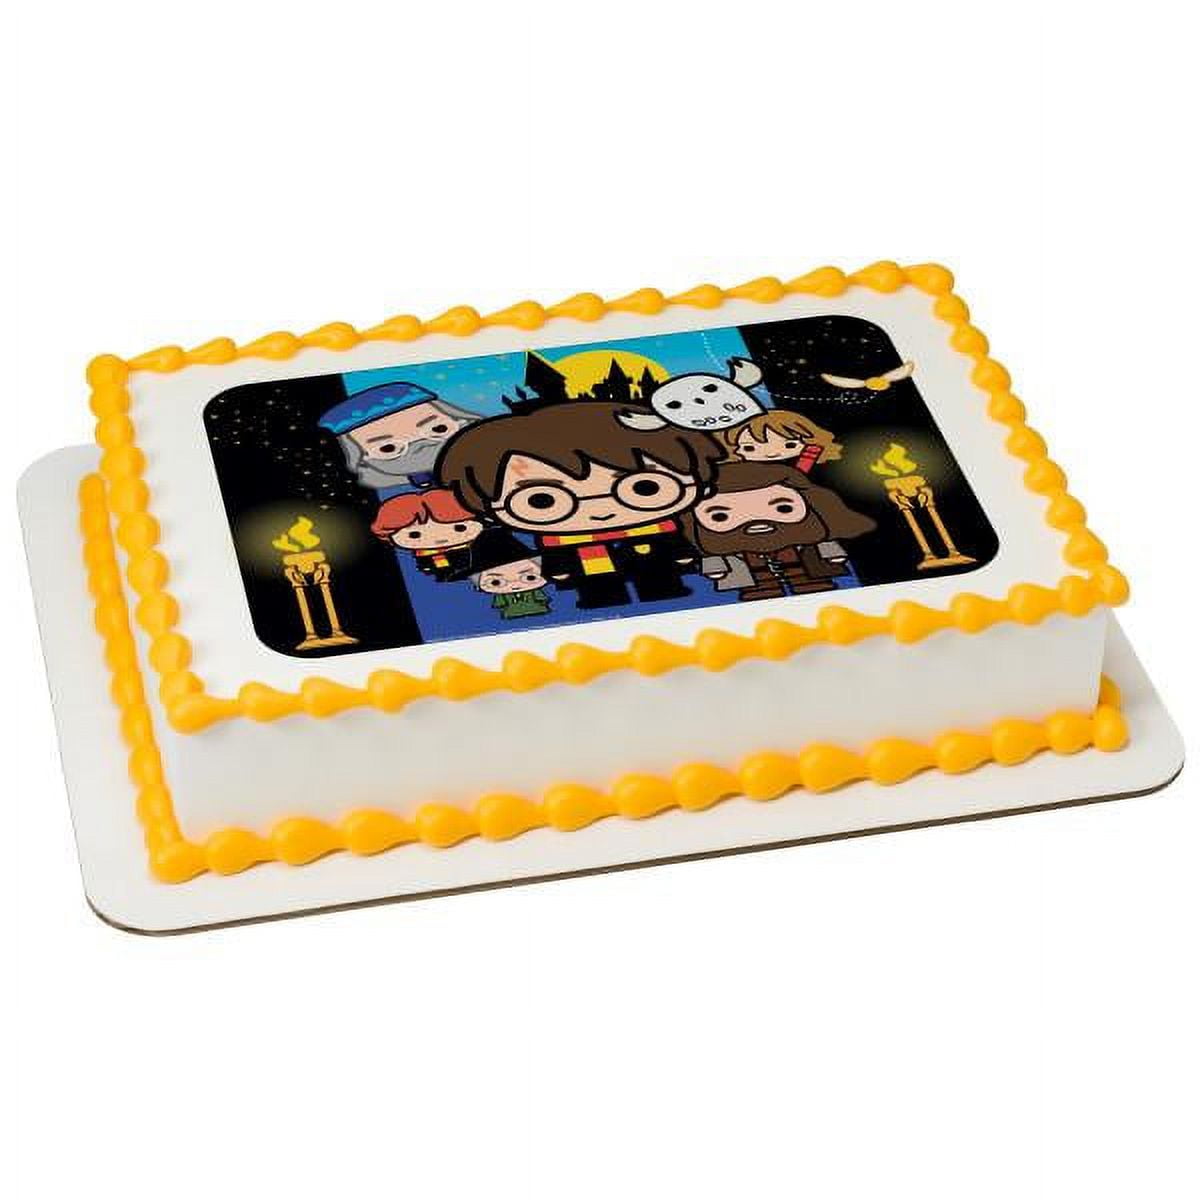 Harry Potter and Friends Edible Cake Topper Image 1/4 sheet